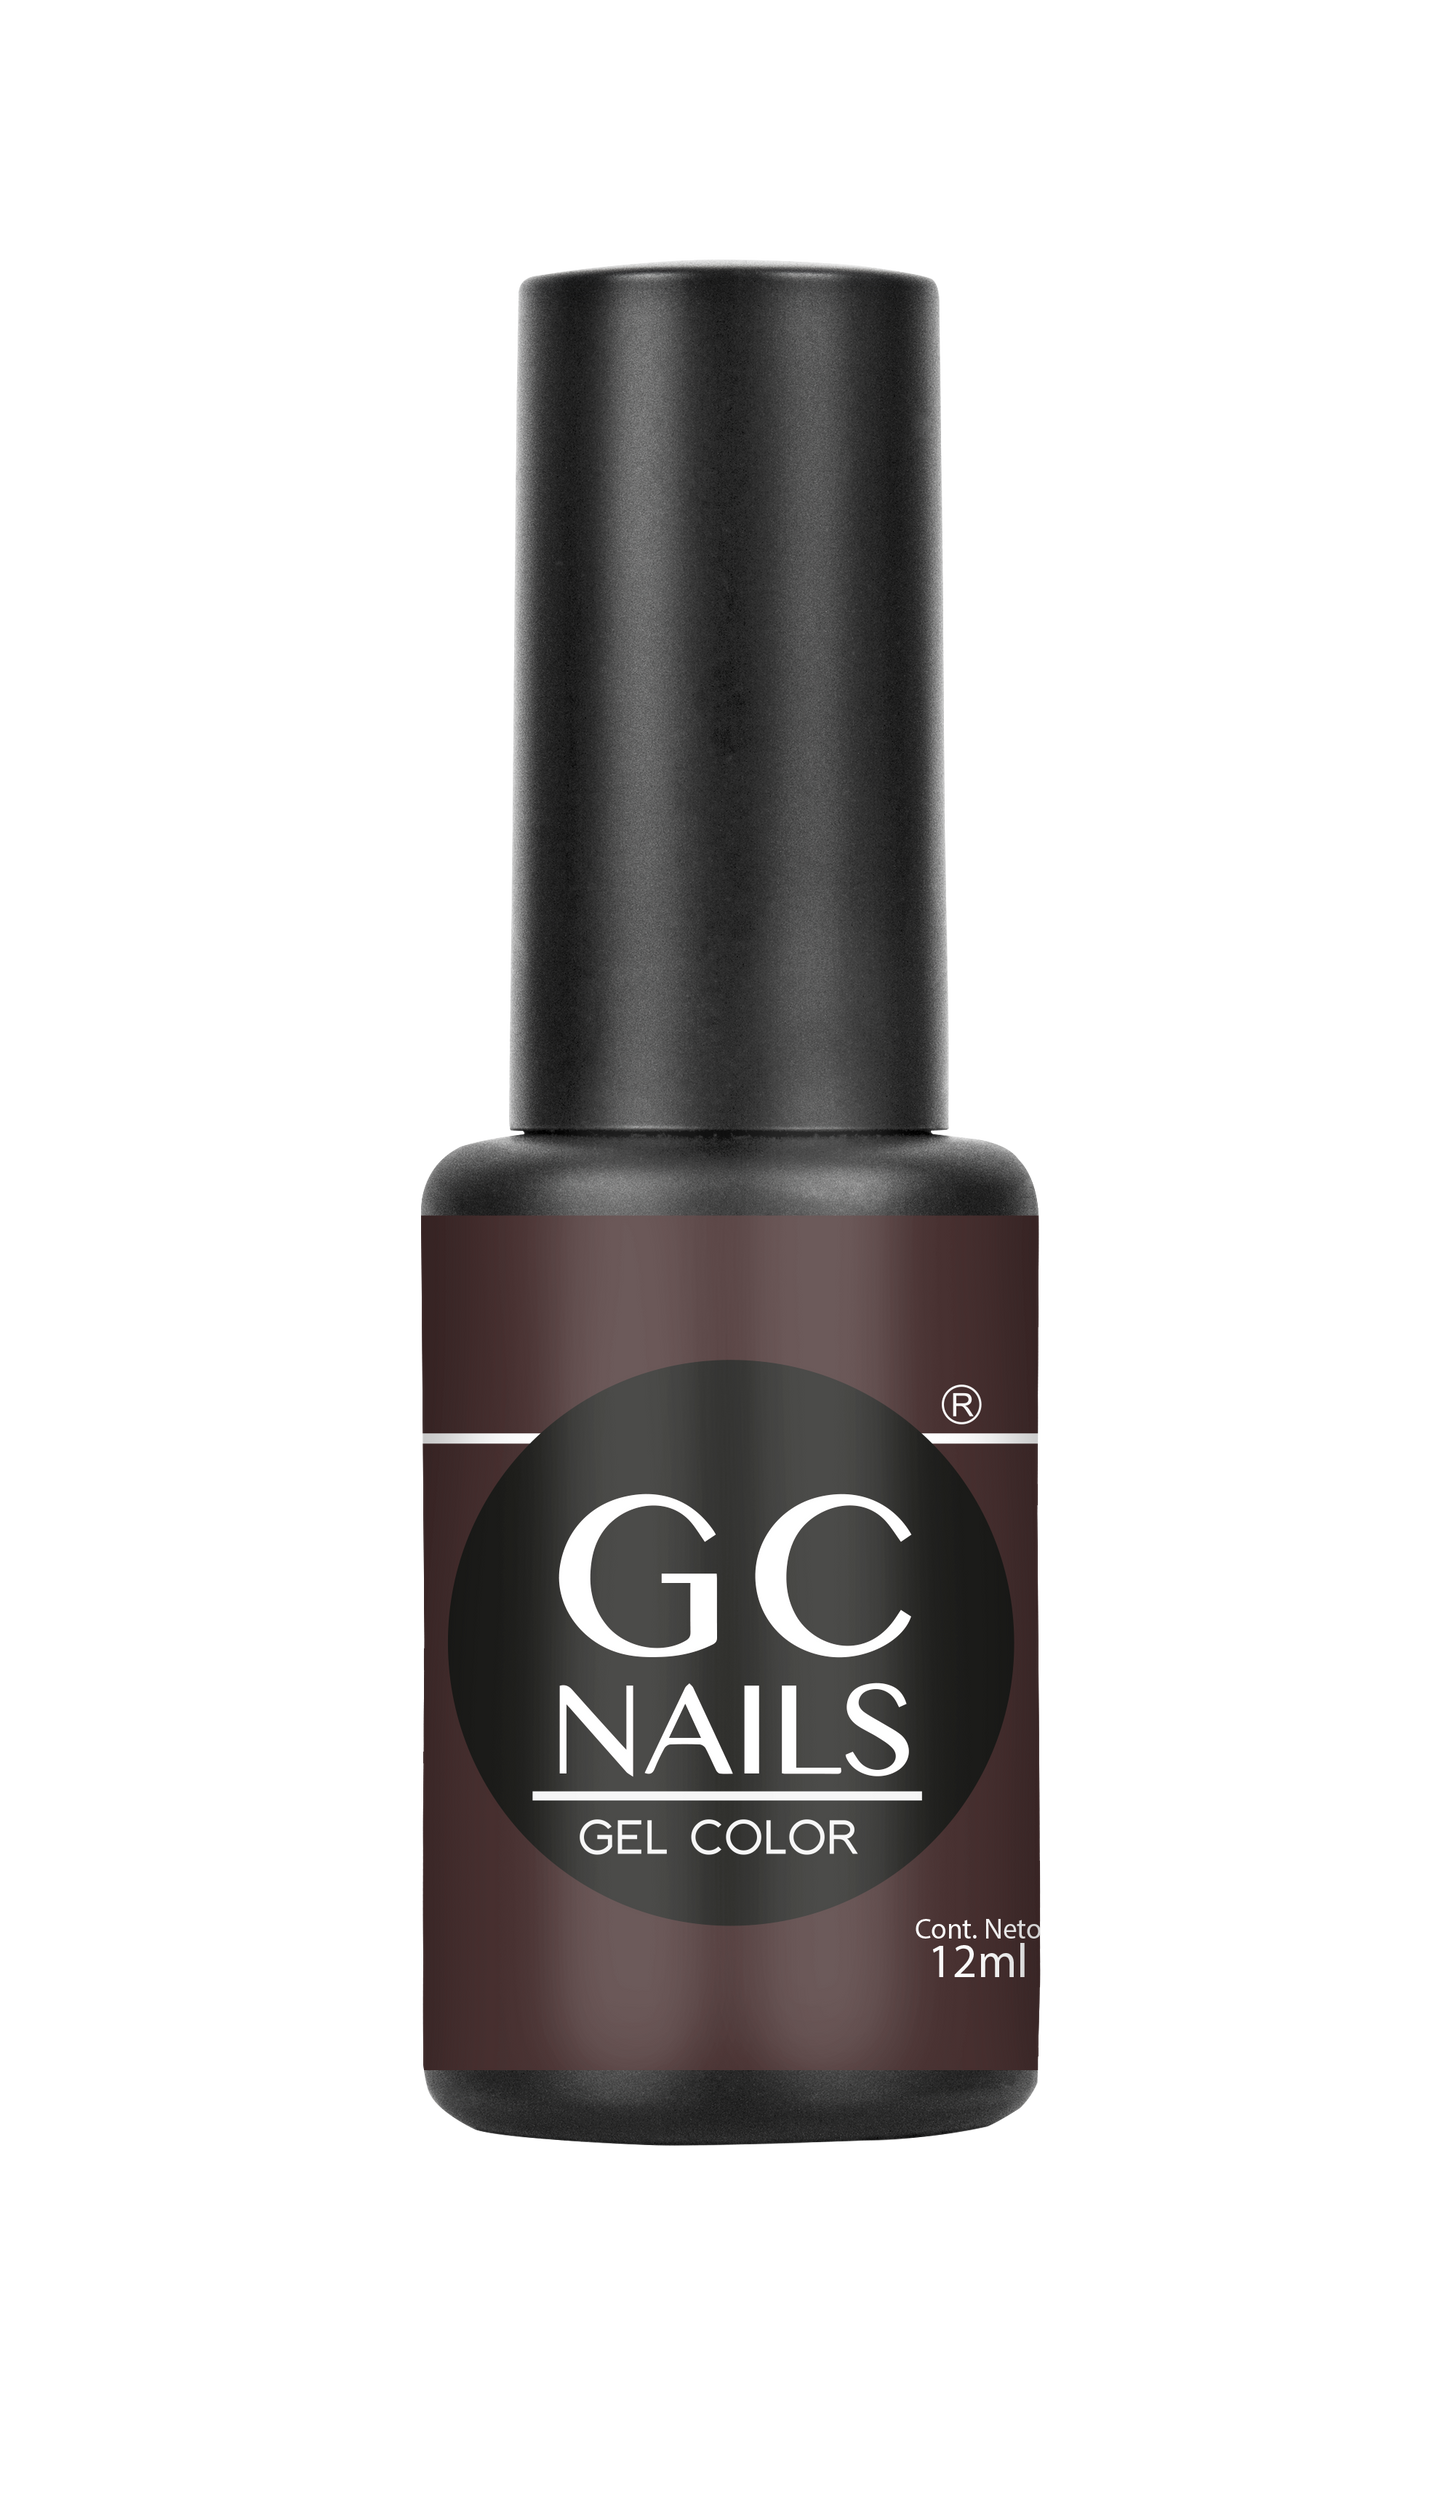 GC nails bel-color 12ml CHOCOLATE 89